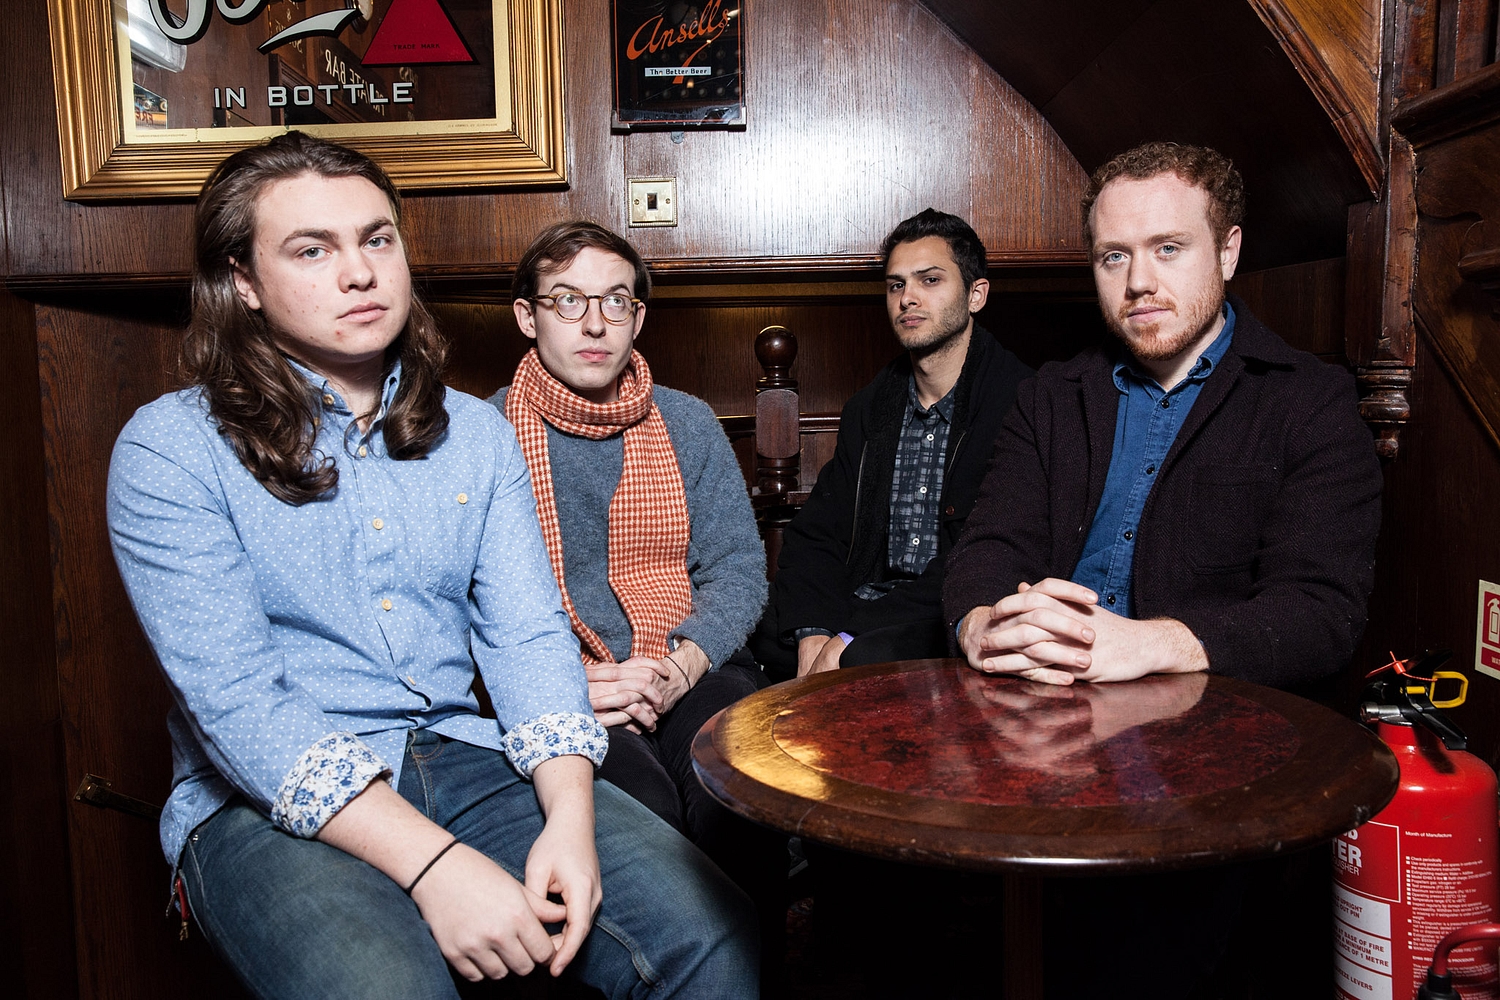 Bombay Bicycle Club: "To be honest, I was completely surprised"